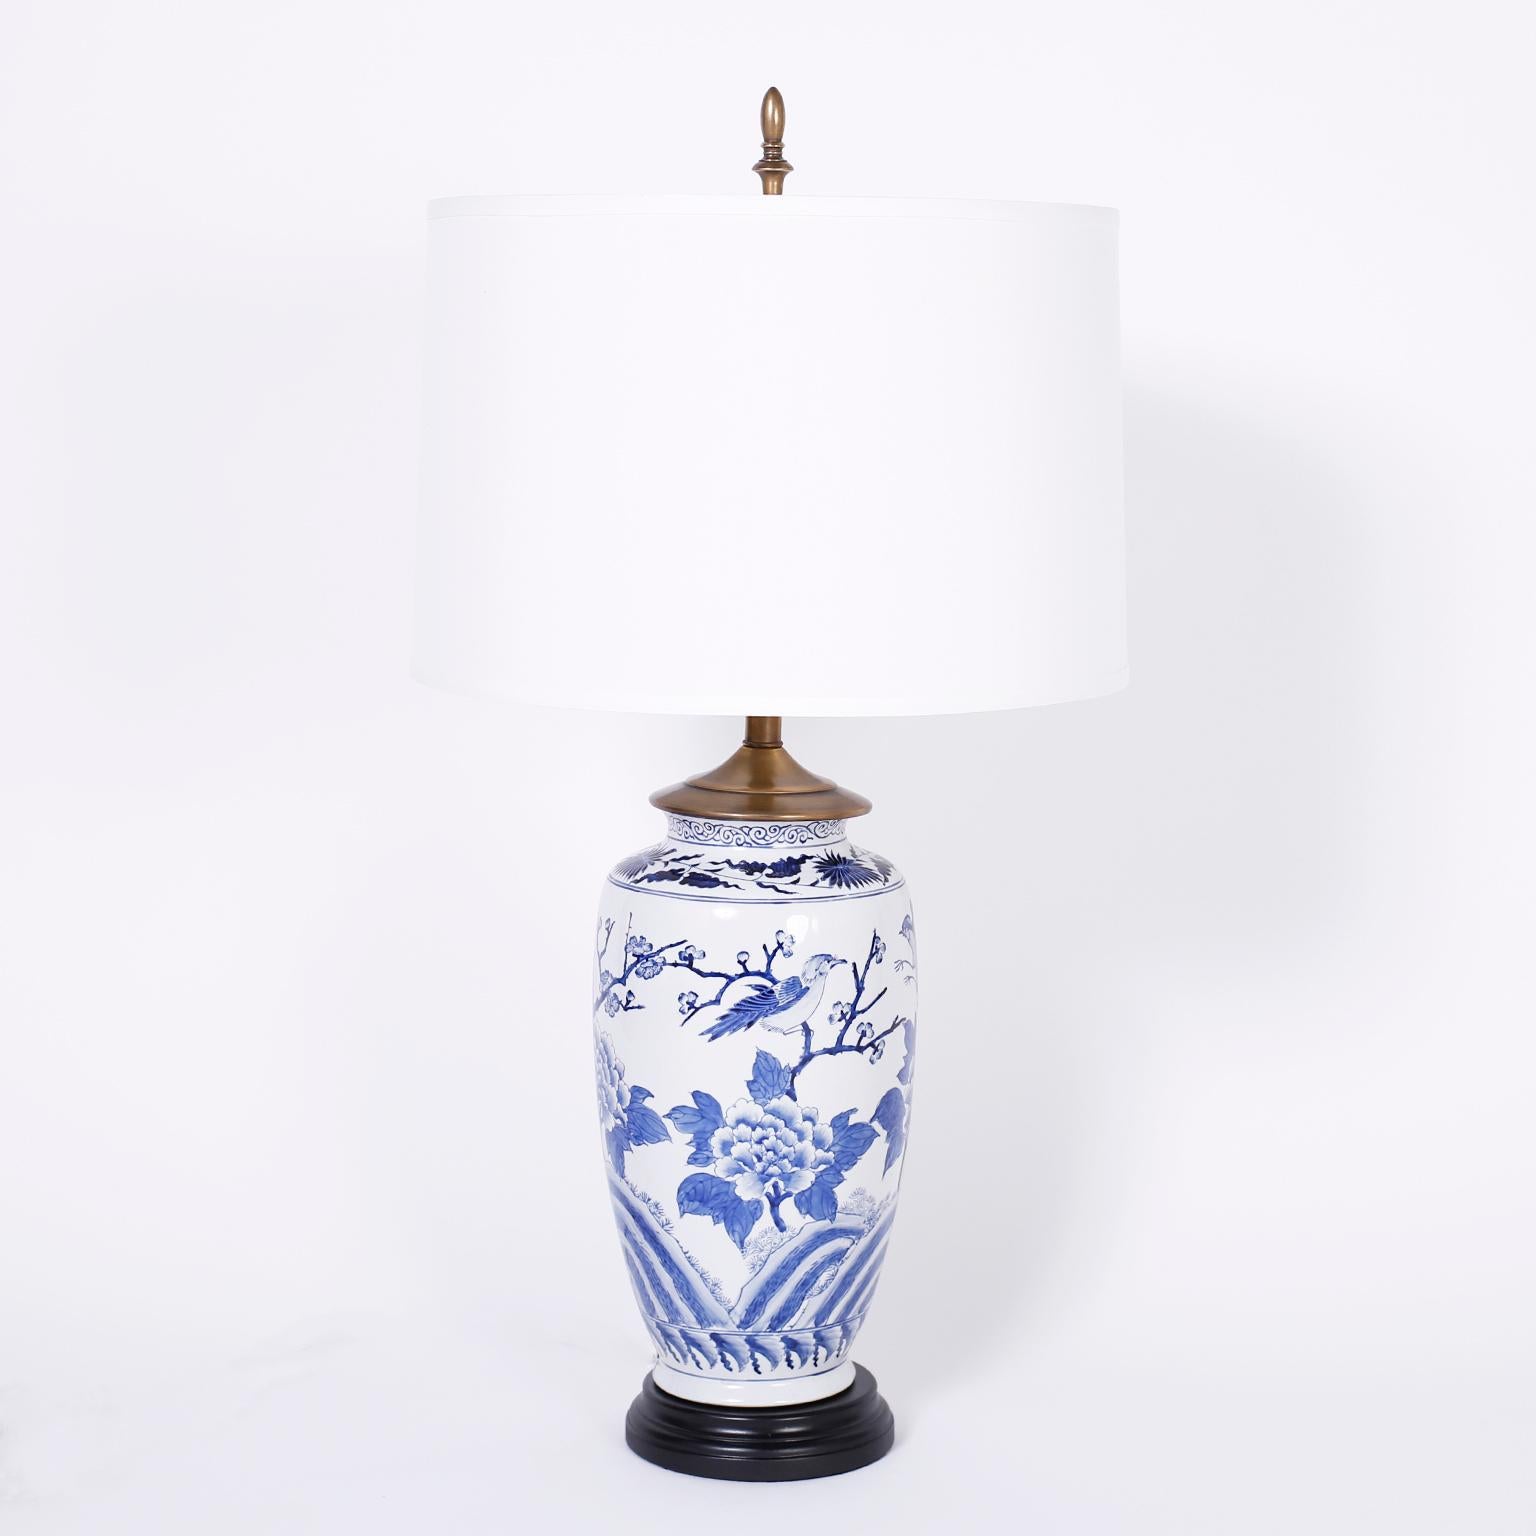 Pair of antique Chinese porcelain vases now table lamps decorated with classic chinoiserie birds and flowers presented on turned ebonized wood bases.